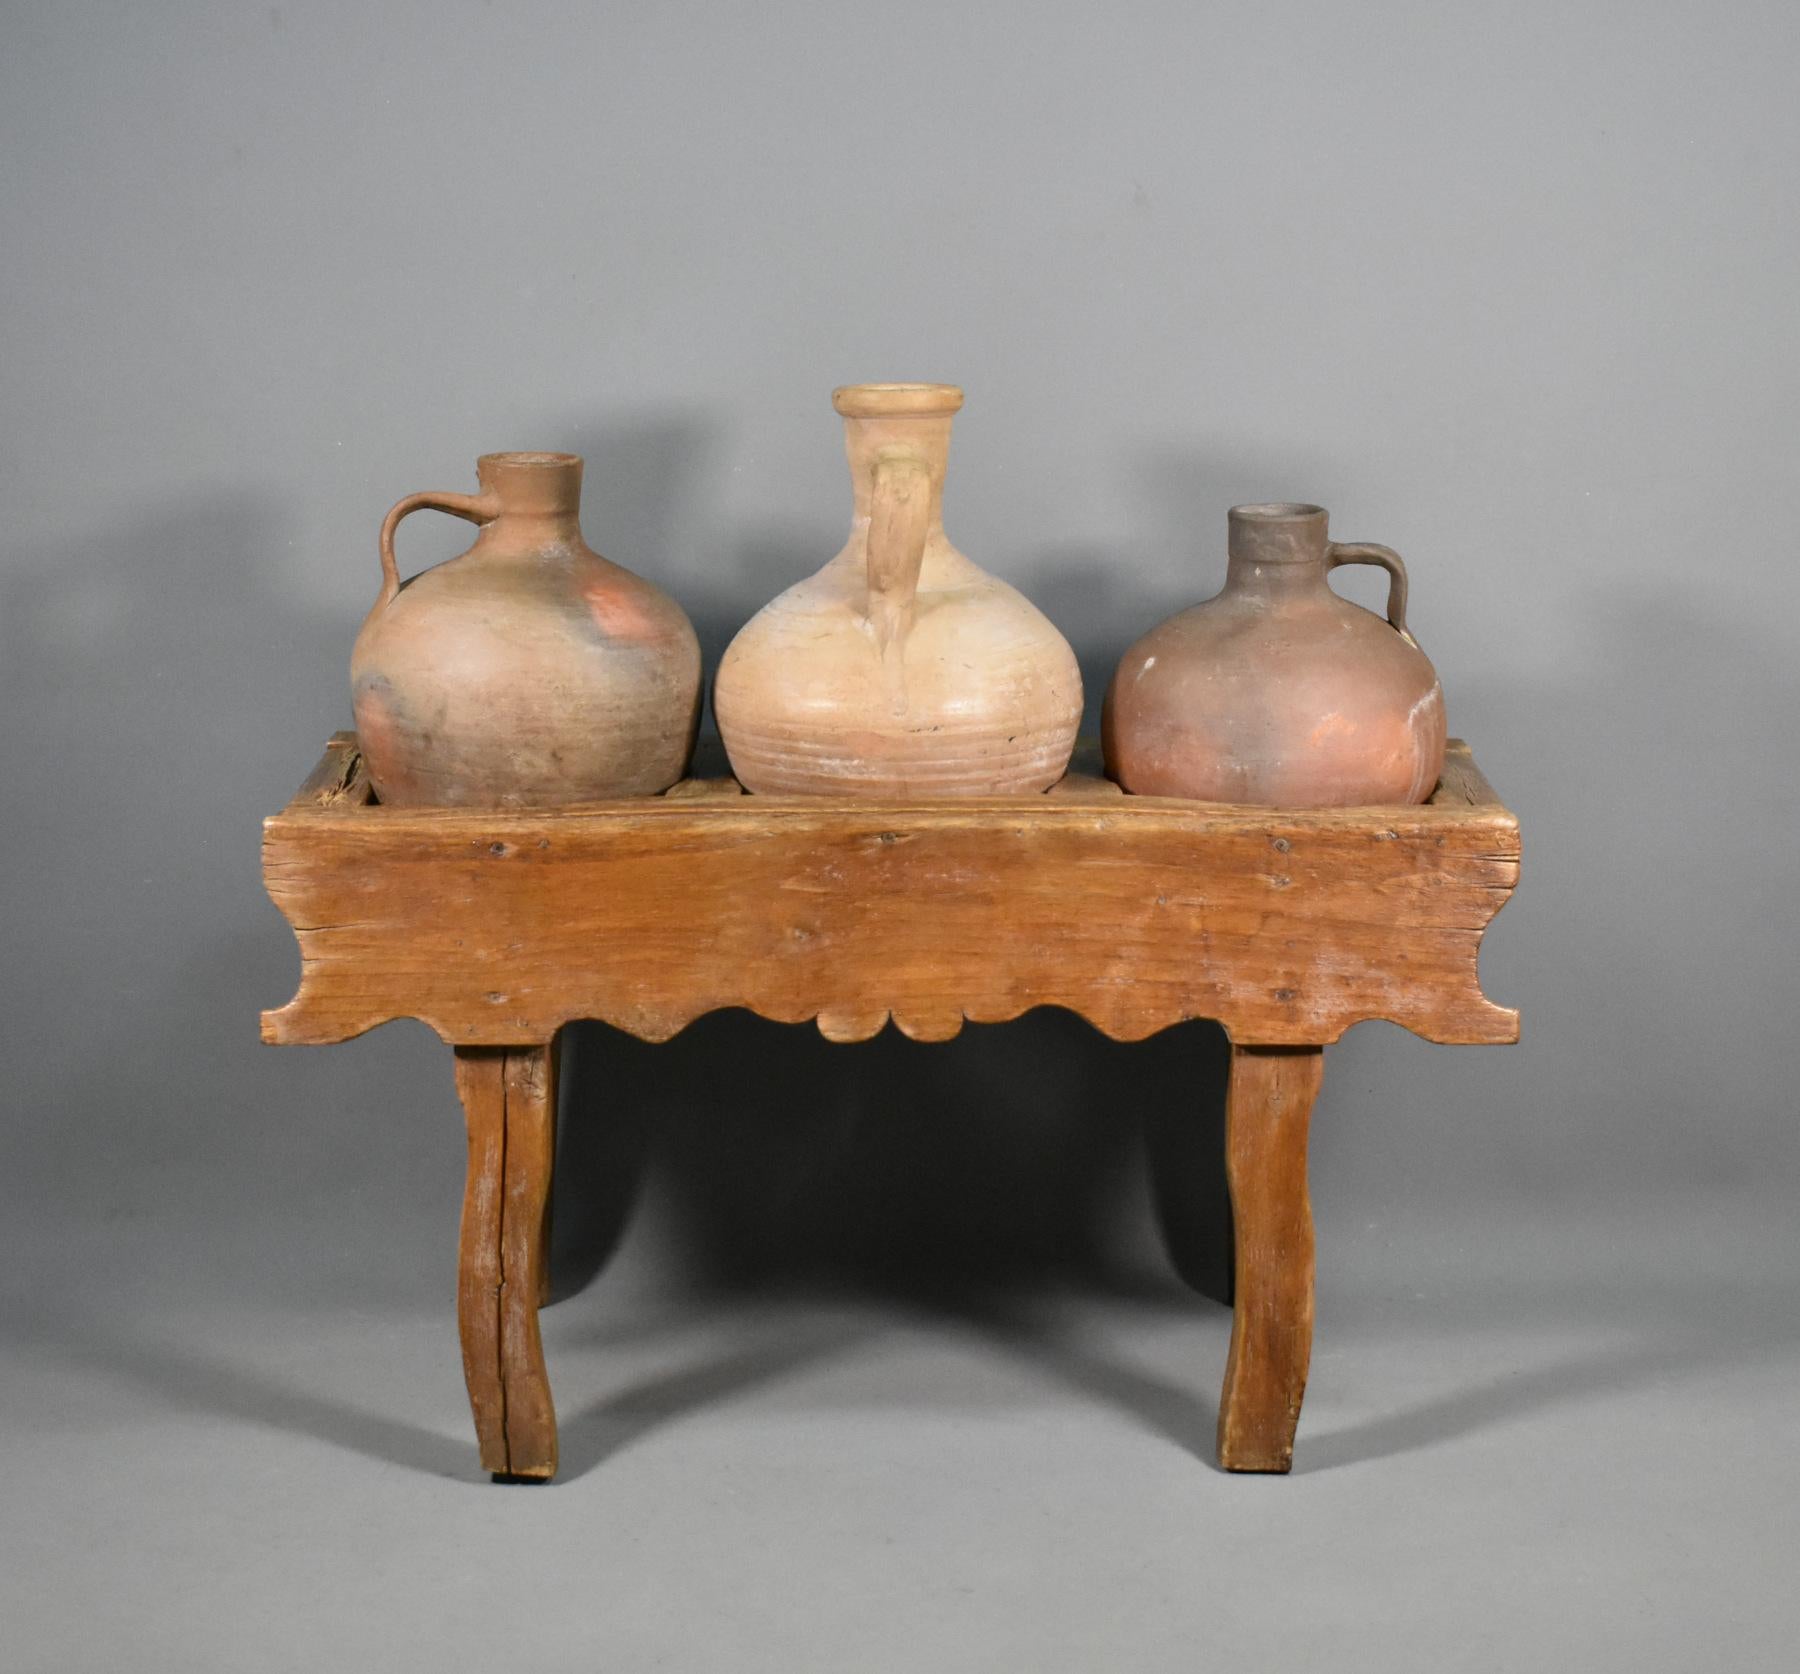 Antique Spanish Tinaja pots and stand.

A provincial Tinaja clay pot stand supporting three different tinaja clay pots. 

Originally designed for holding water, the beautifully aged pots show wonderful colouration. 

The pots sit comfortably